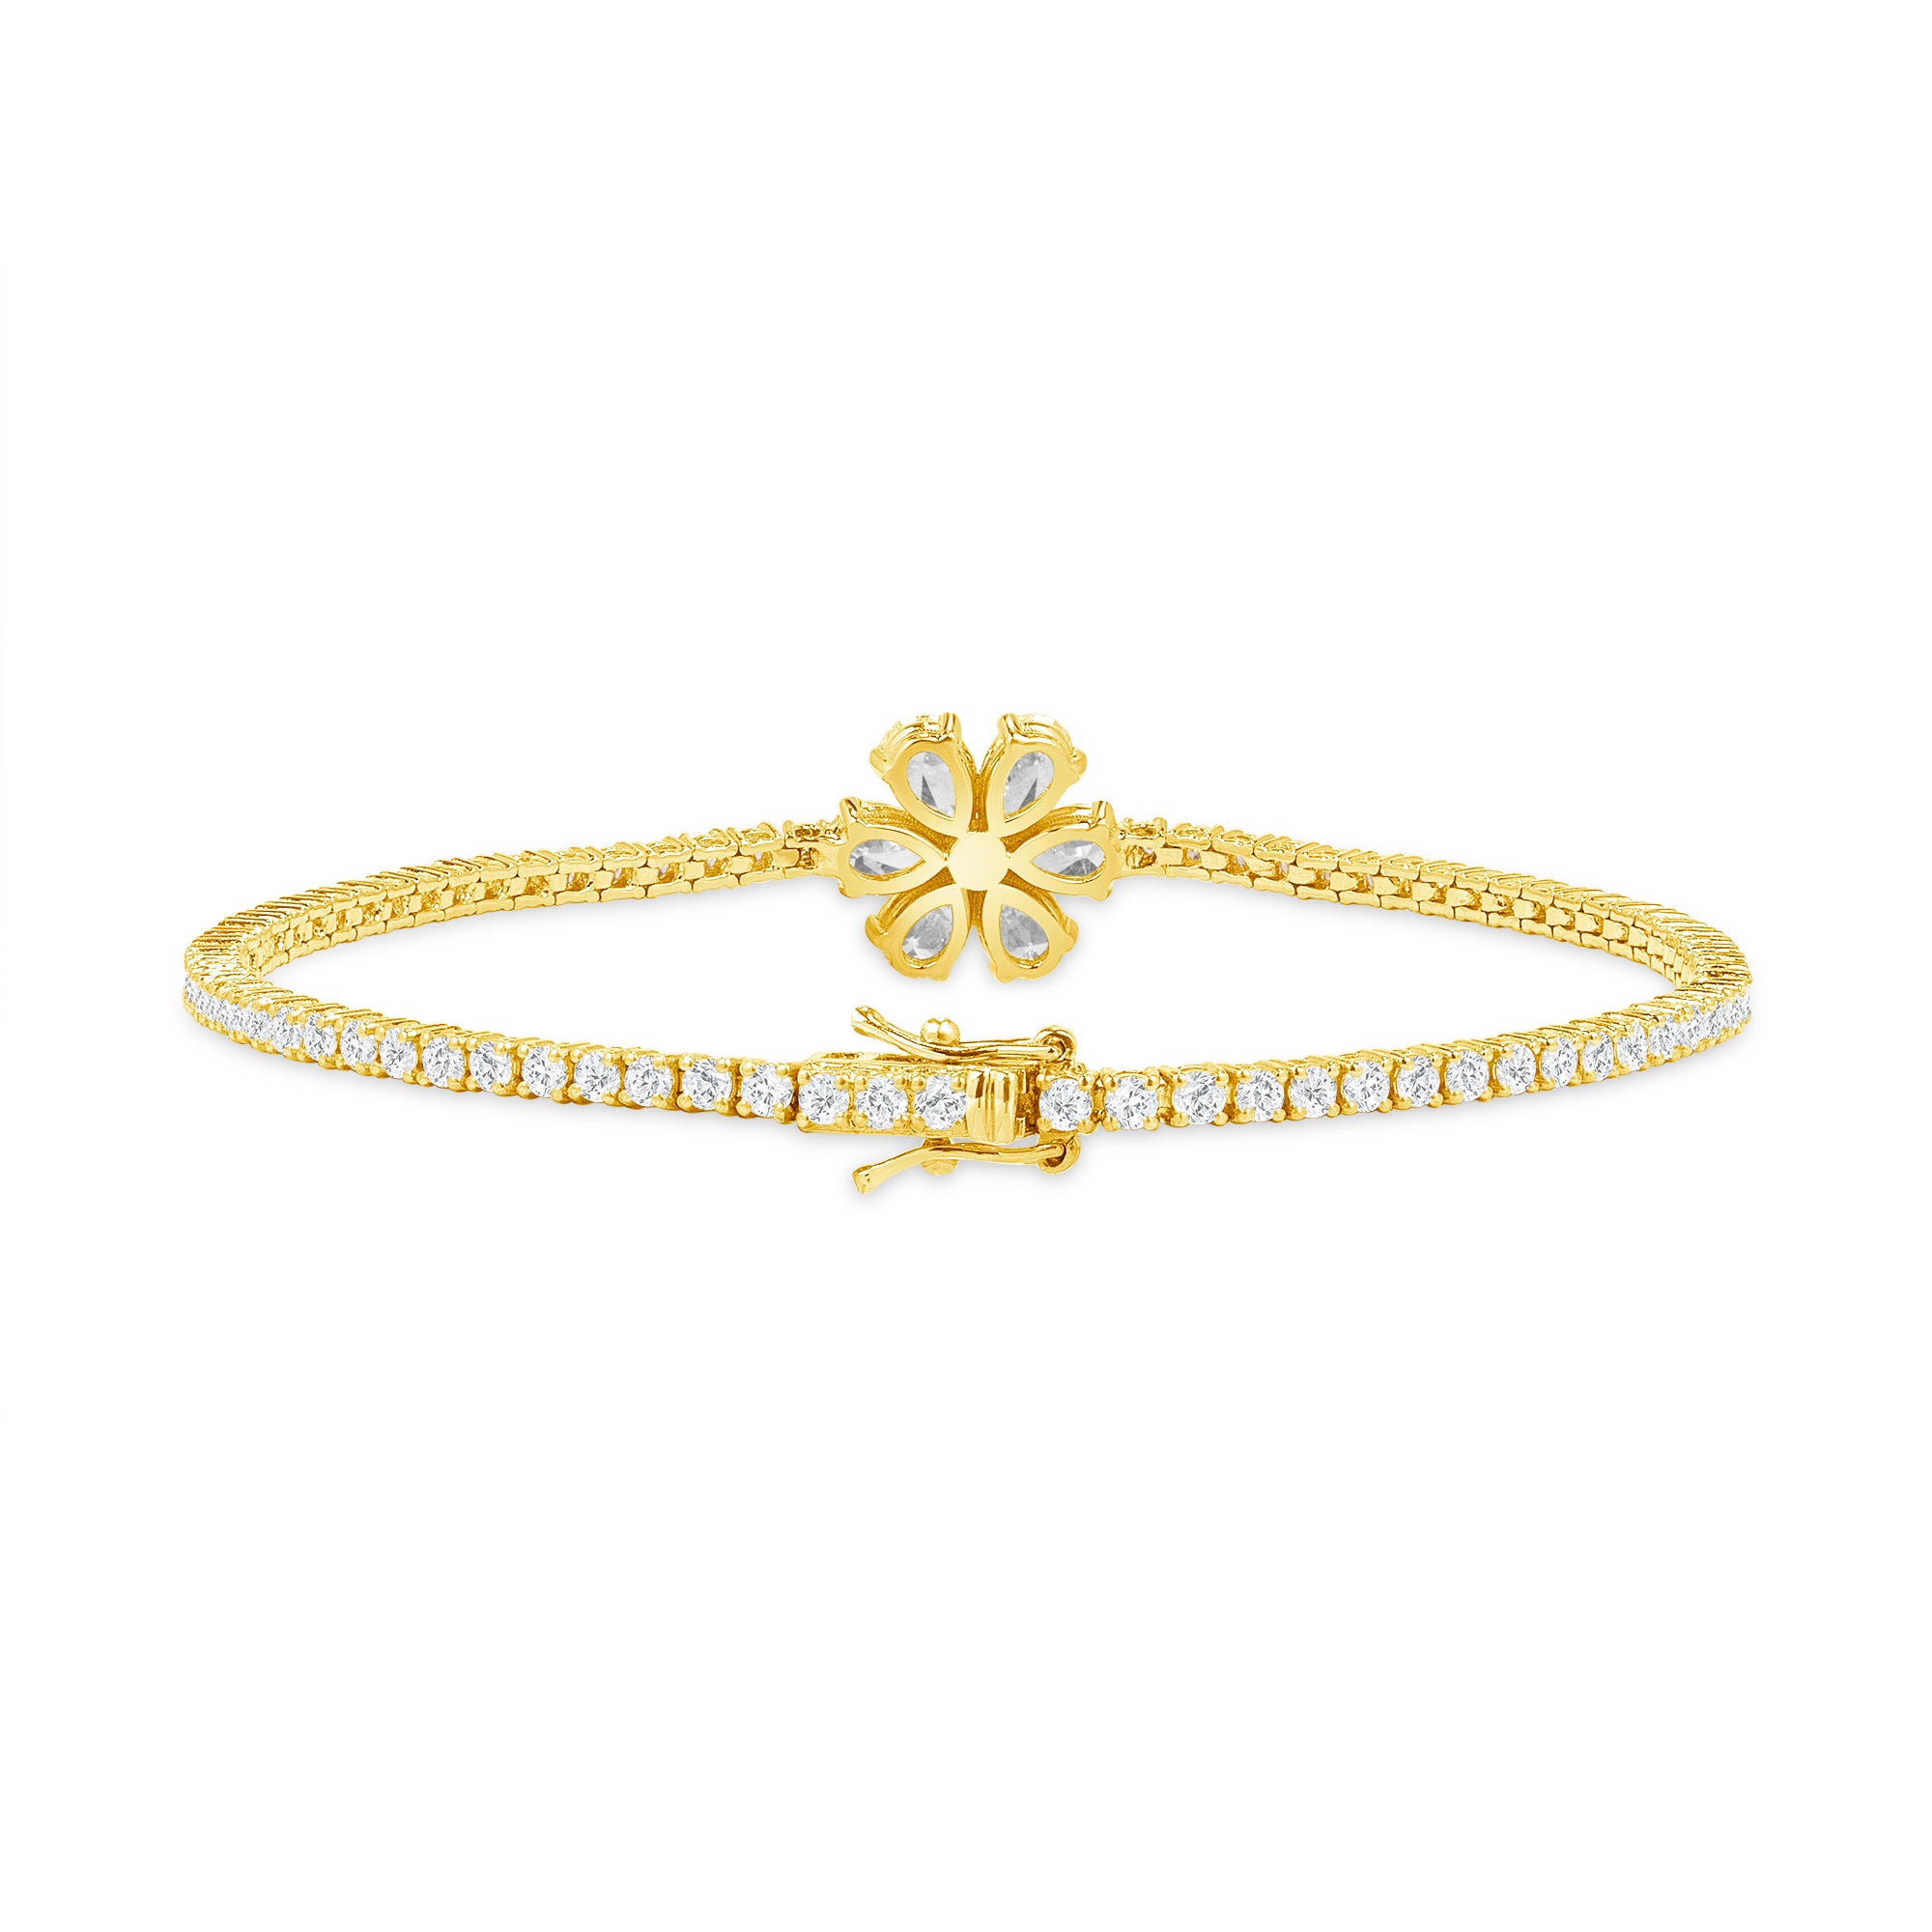 3.95ctw Mixed Cut Diamond Tennis Bracelet With Flower Accent Stone in 18K Yellow Gold